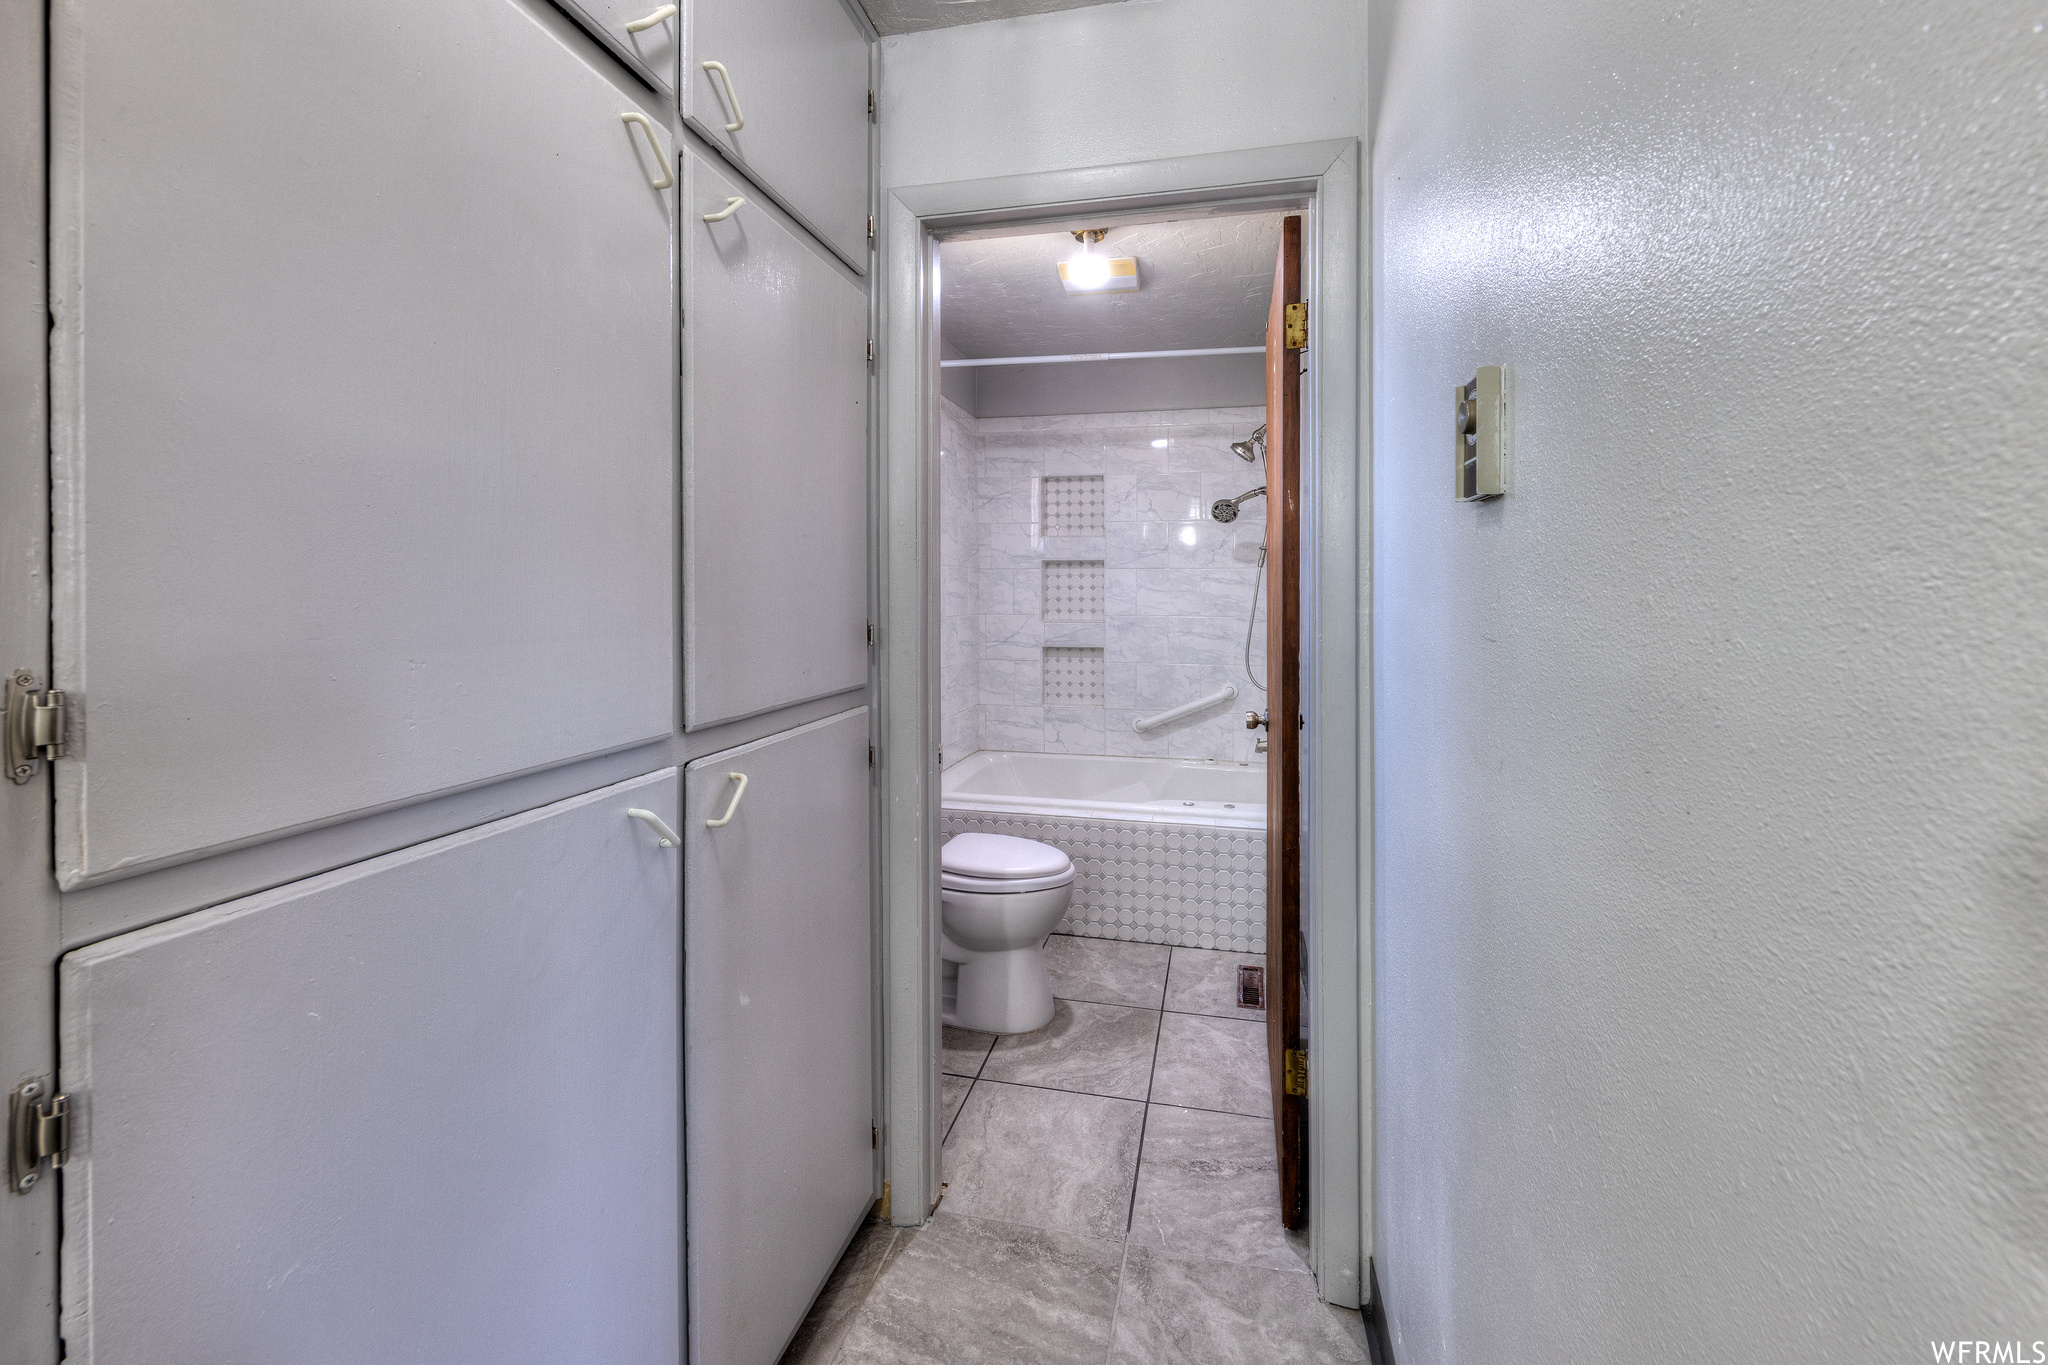 Bathroom featuring tile flooring, toilet, and bathing tub / shower combination